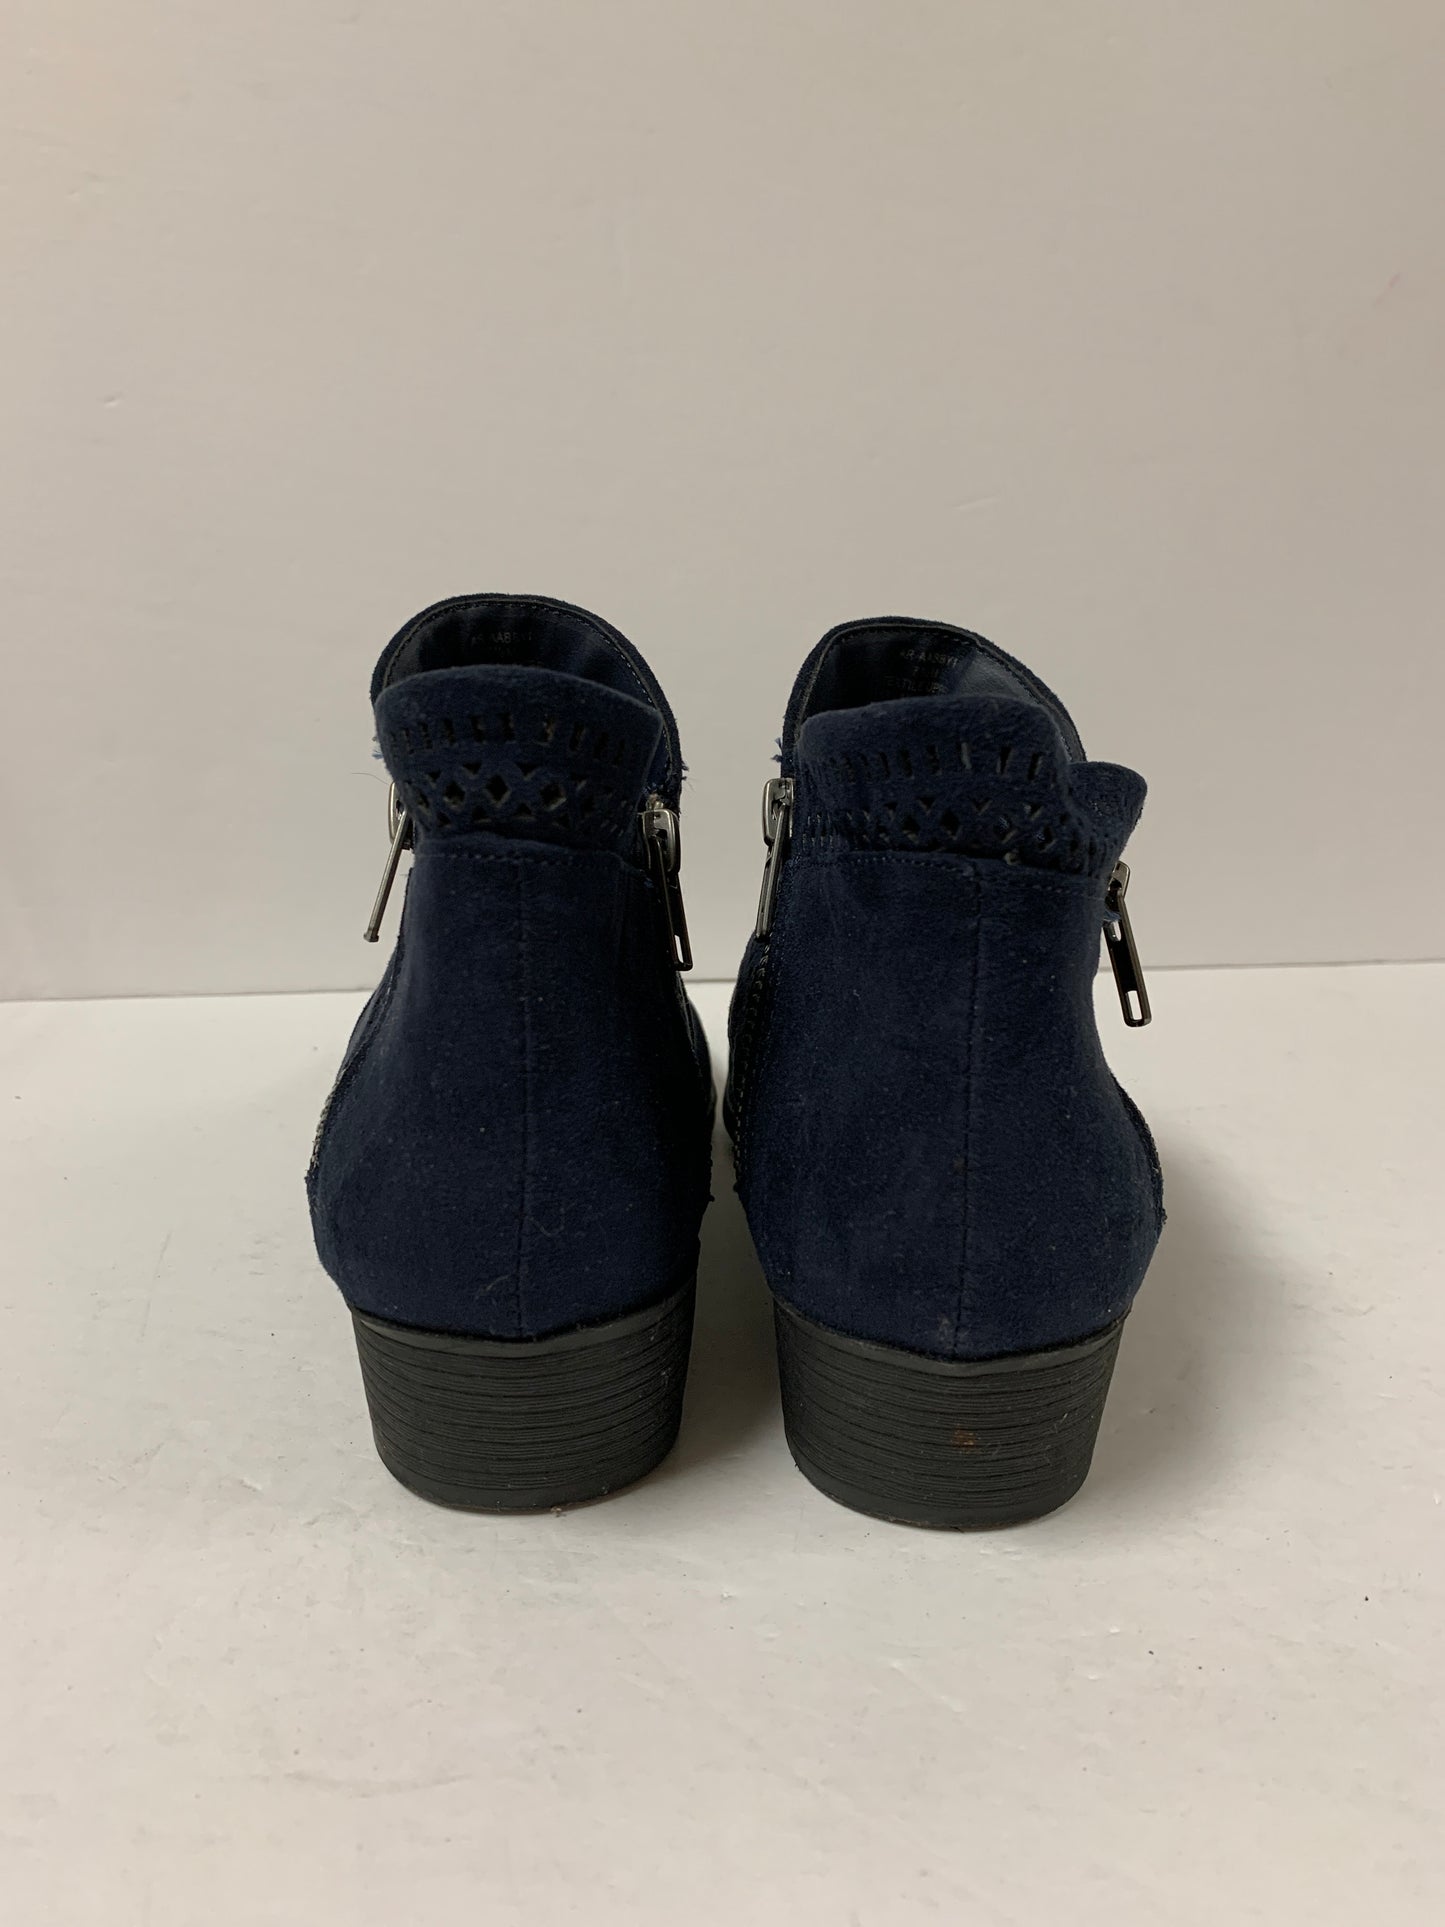 Boots Ankle Heels By American Rag  Size: 7.5